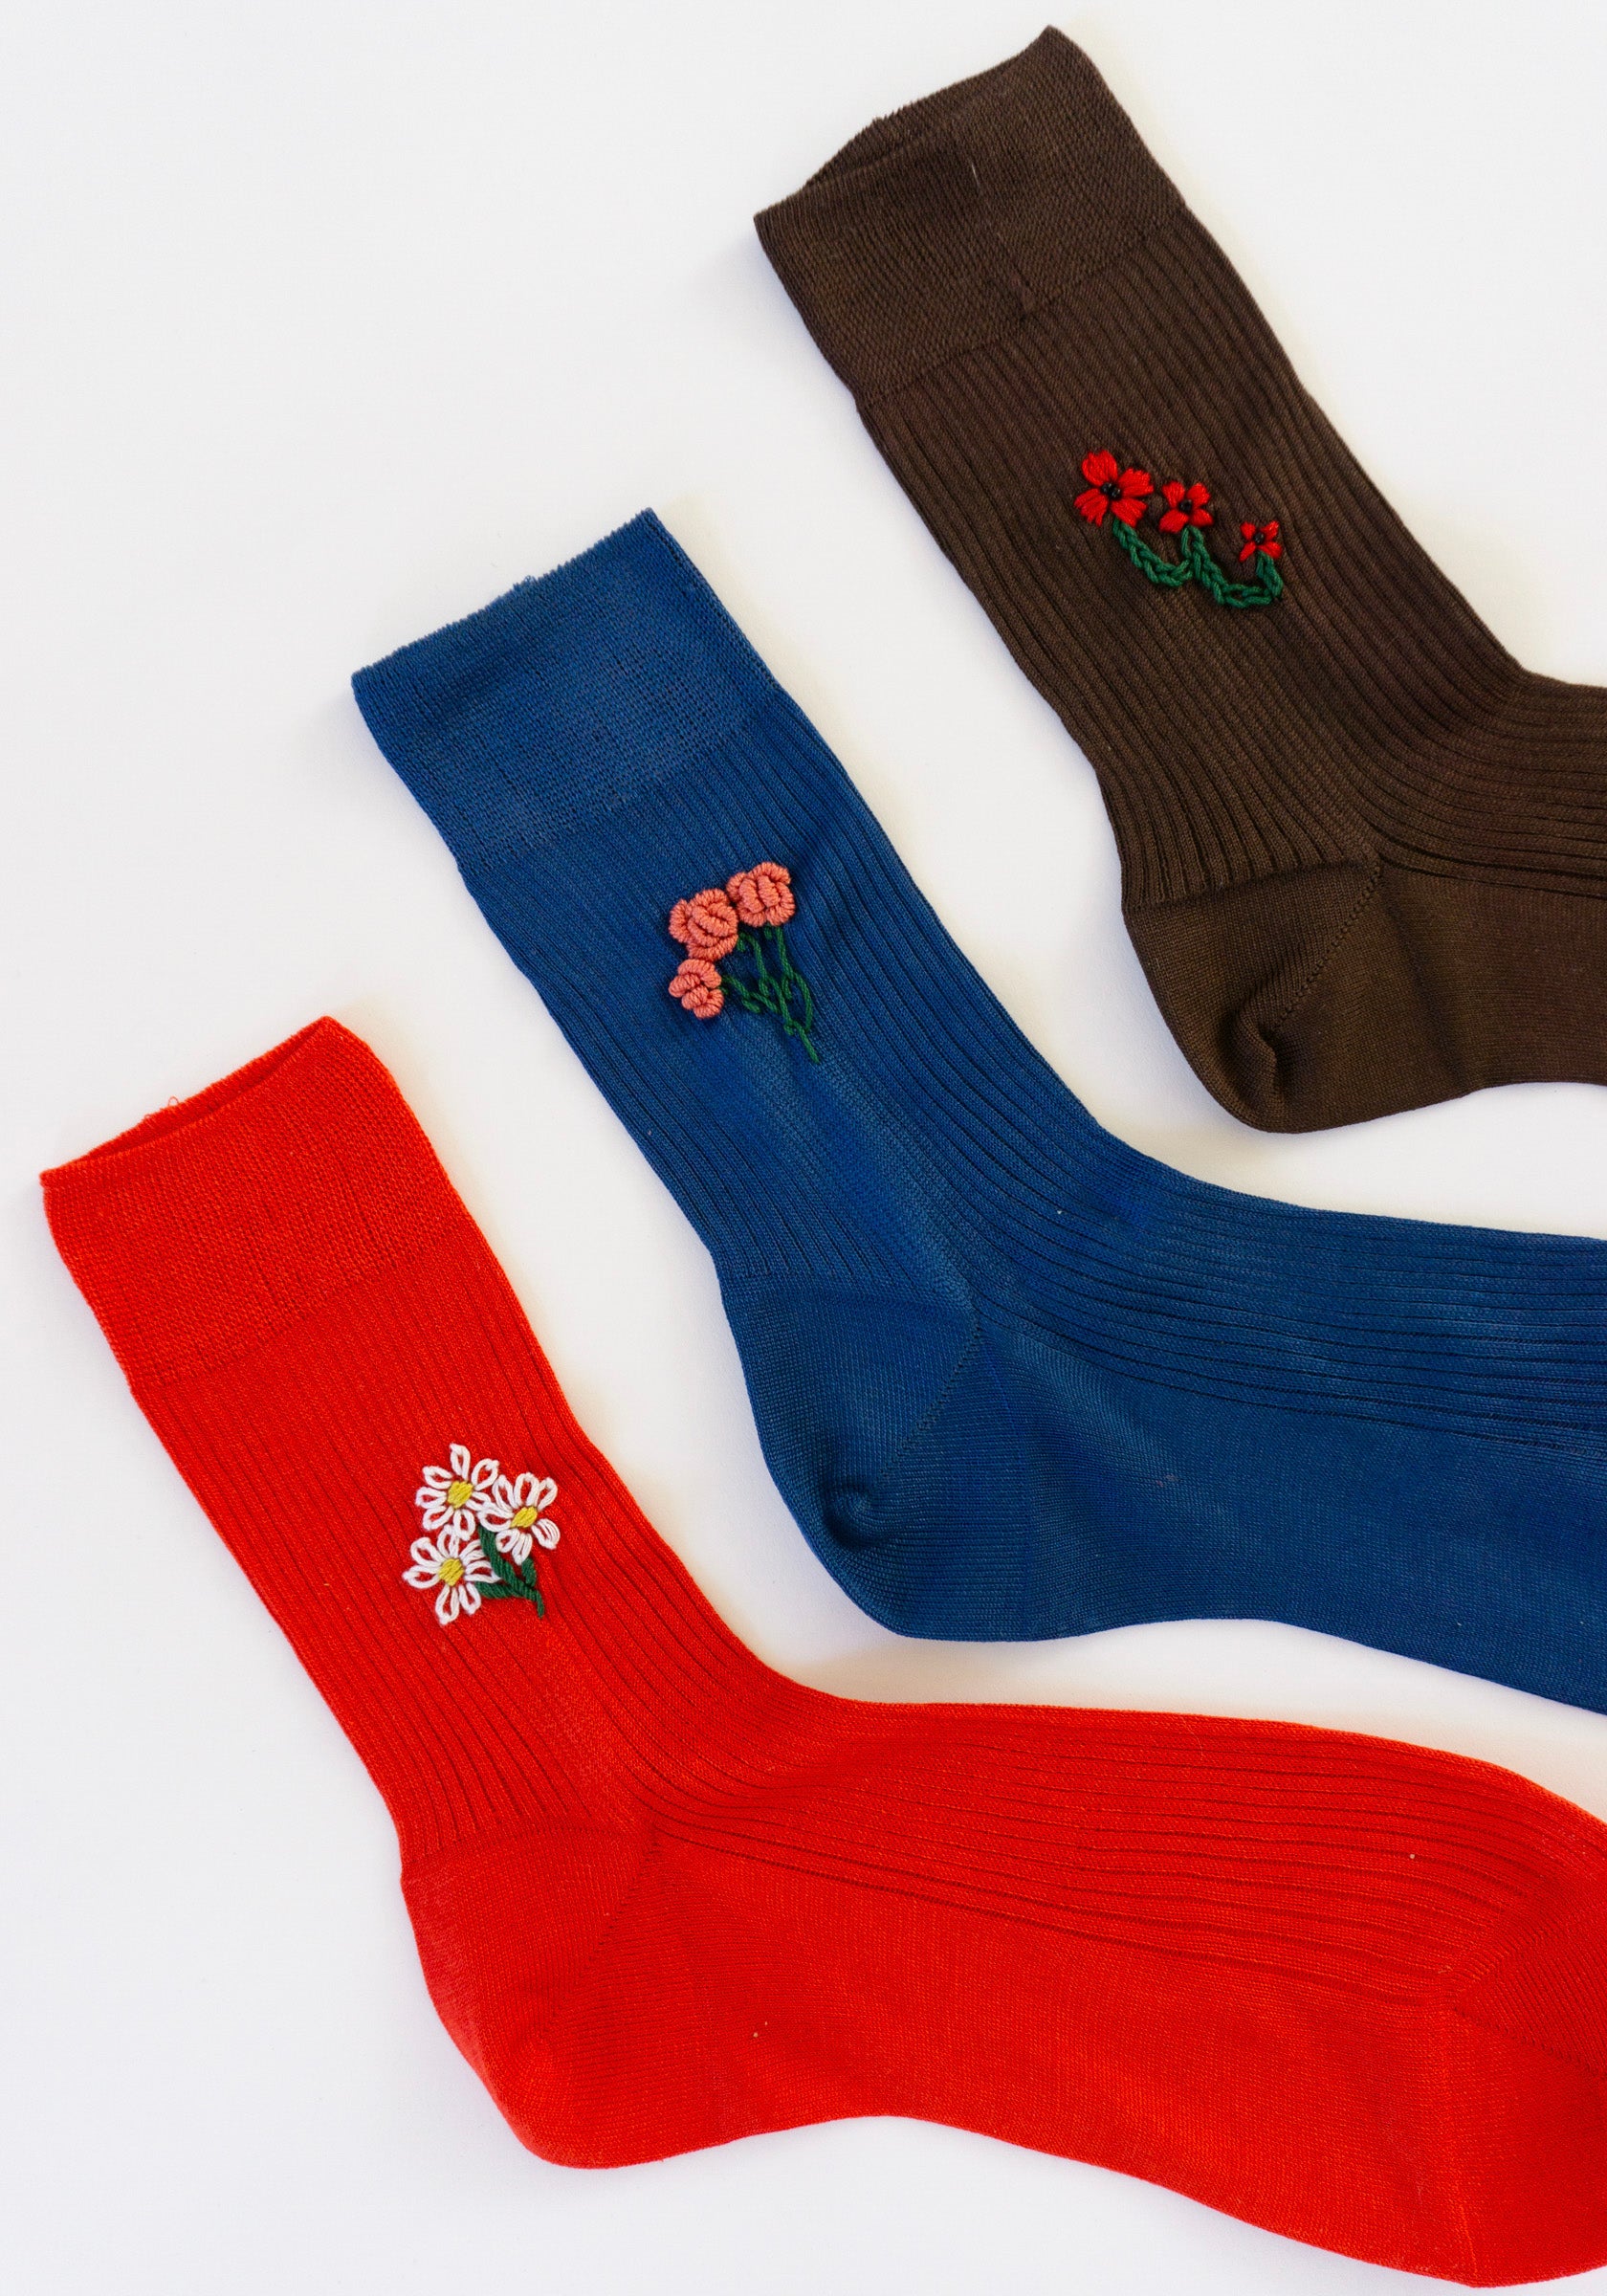 Floral Embroidered Sock with Brown Poppy